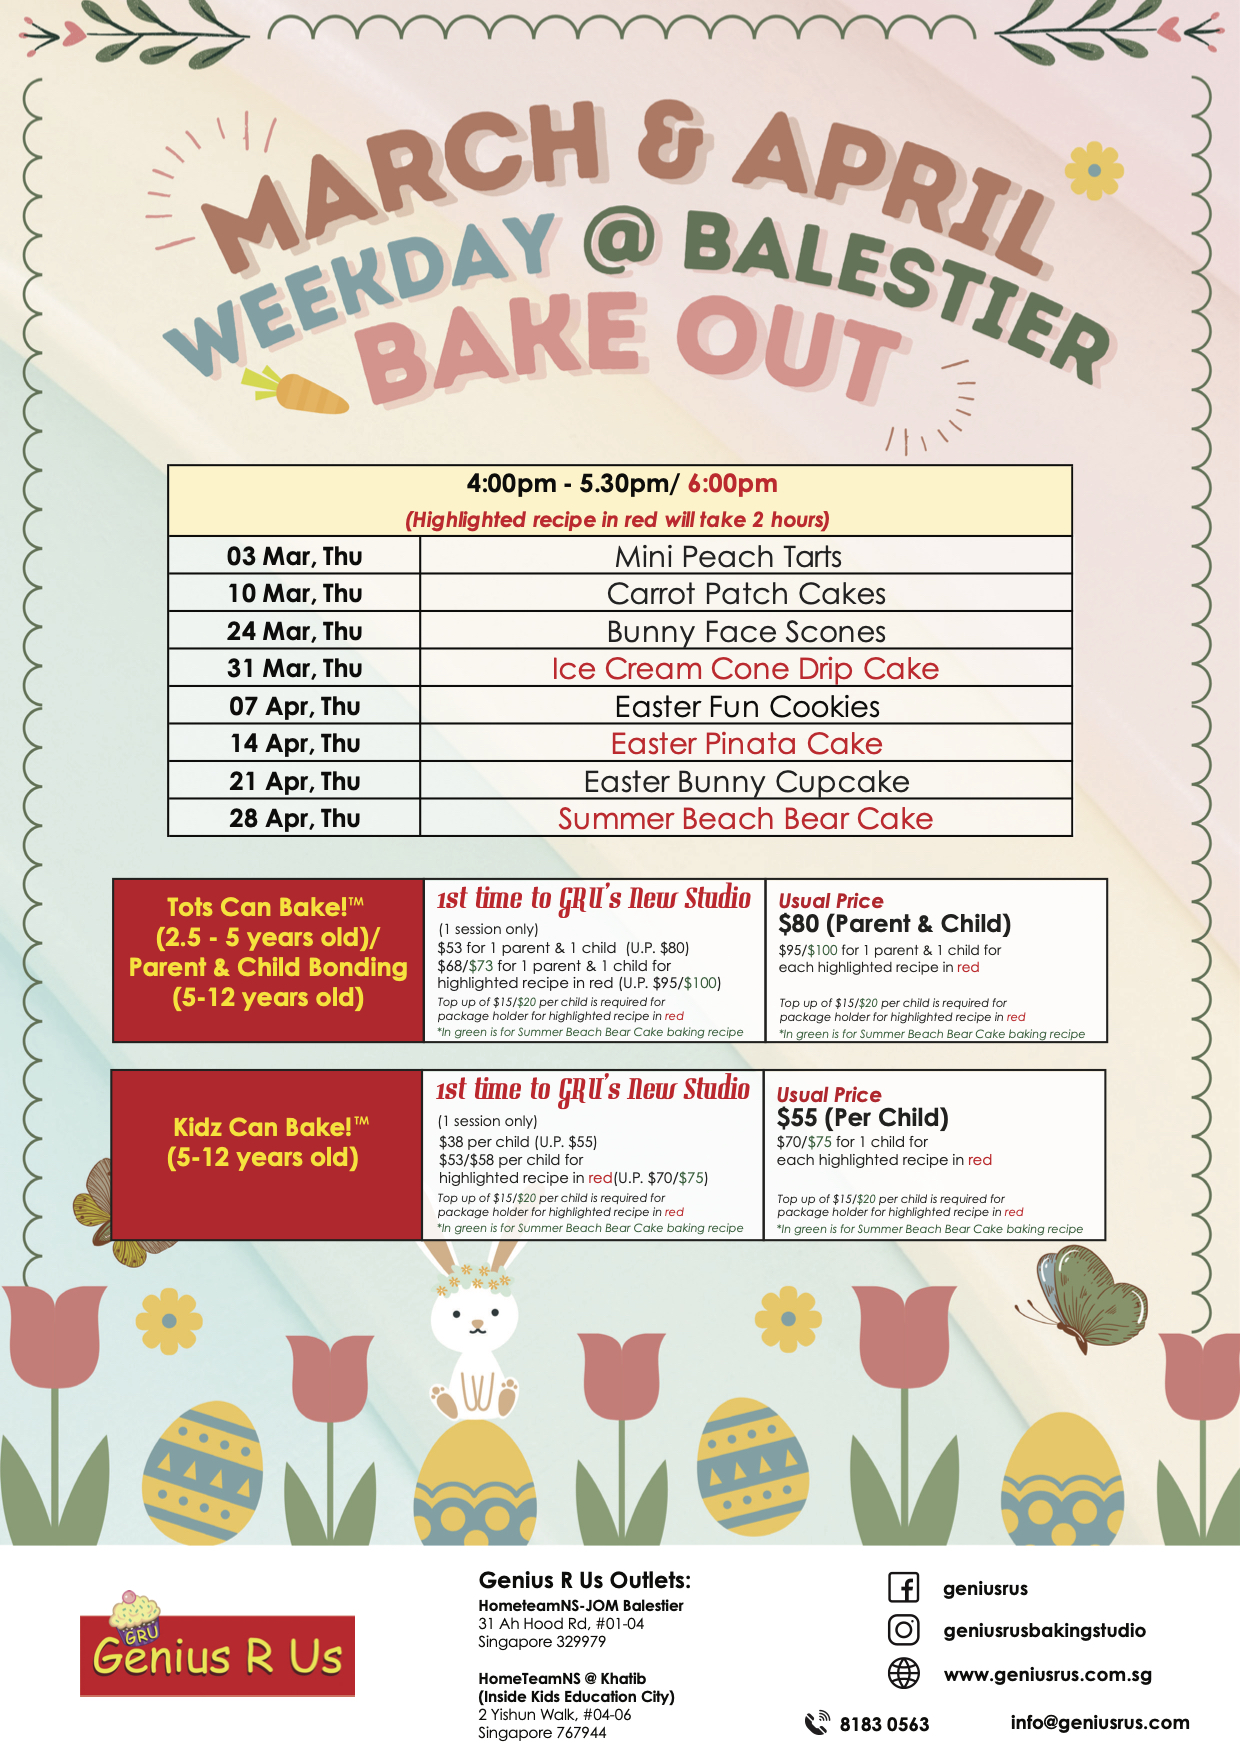 March & April Weekdays Bakeout @ Balestier; 